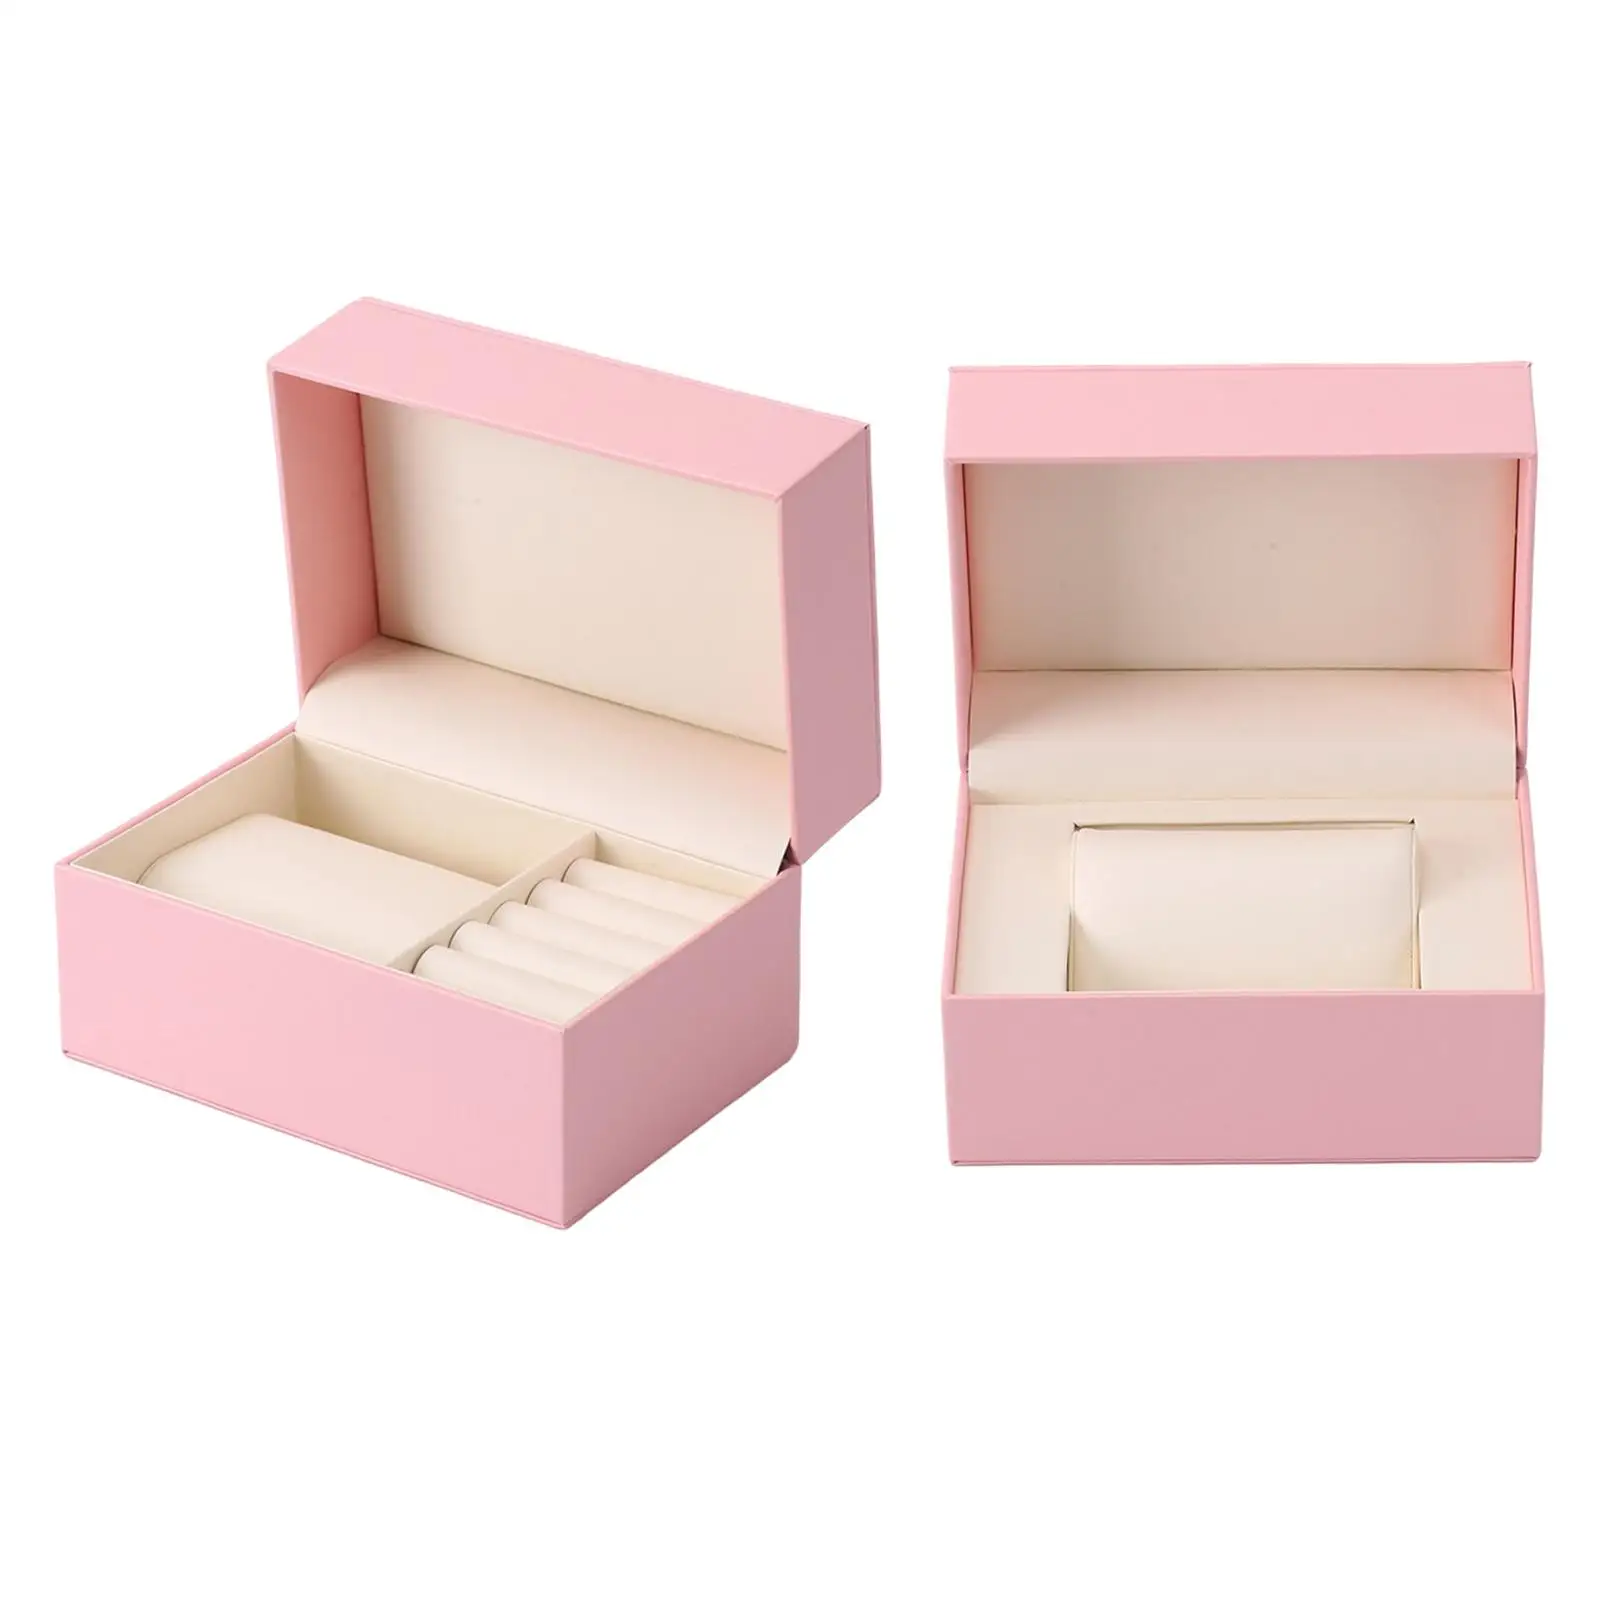 Jewelry Box,  Organizer Cases with Doubel Layer for Women Earringss and Travel Accessories